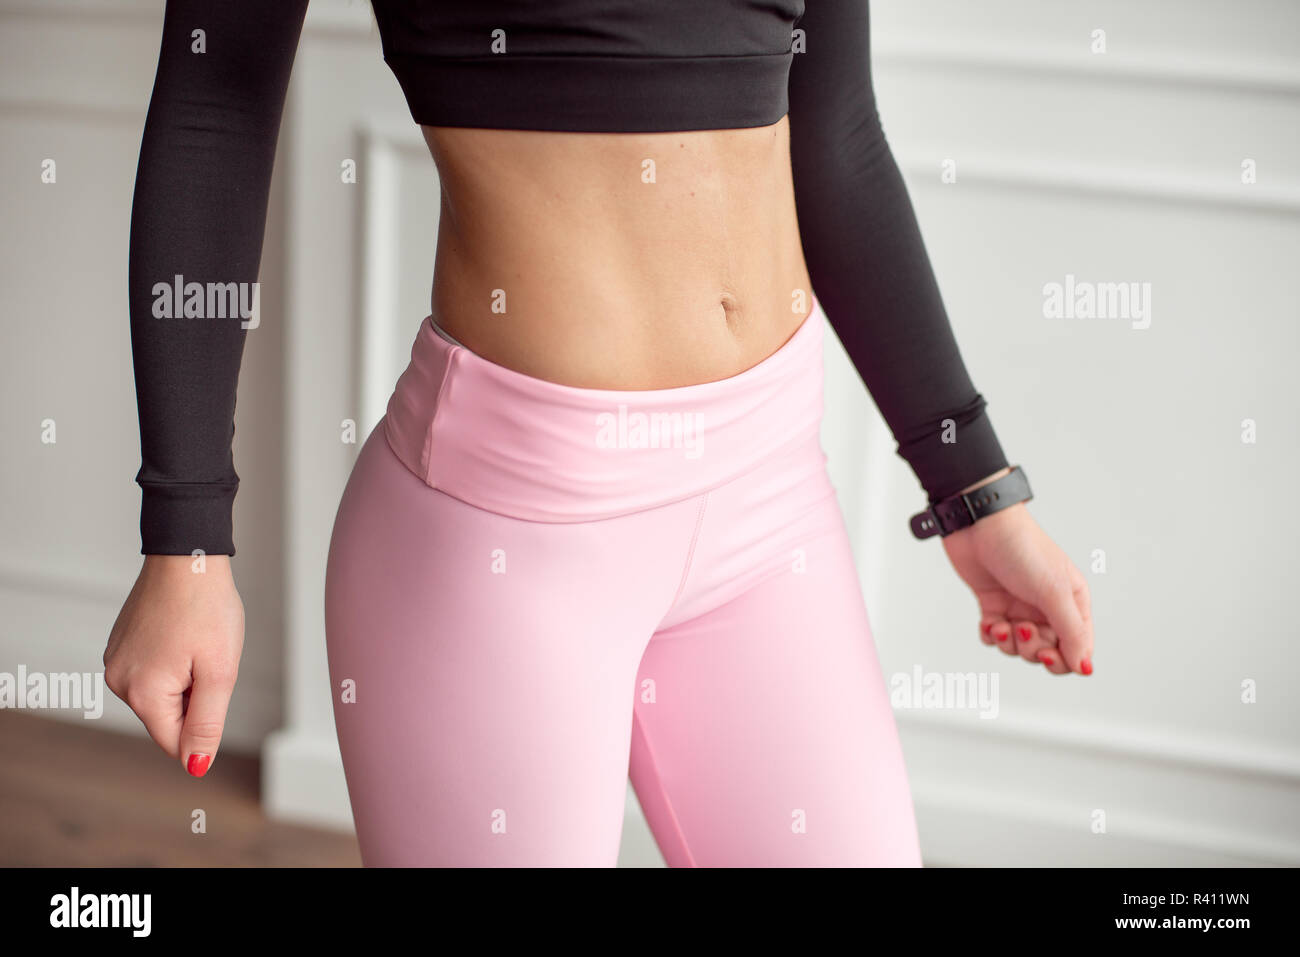 https://c8.alamy.com/comp/R411WN/close-up-athletic-female-body-slim-elegant-waist-of-a-stylish-fitness-model-with-perfect-figure-lines-after-an-effective-training-class-pumped-up-arm-R411WN.jpg